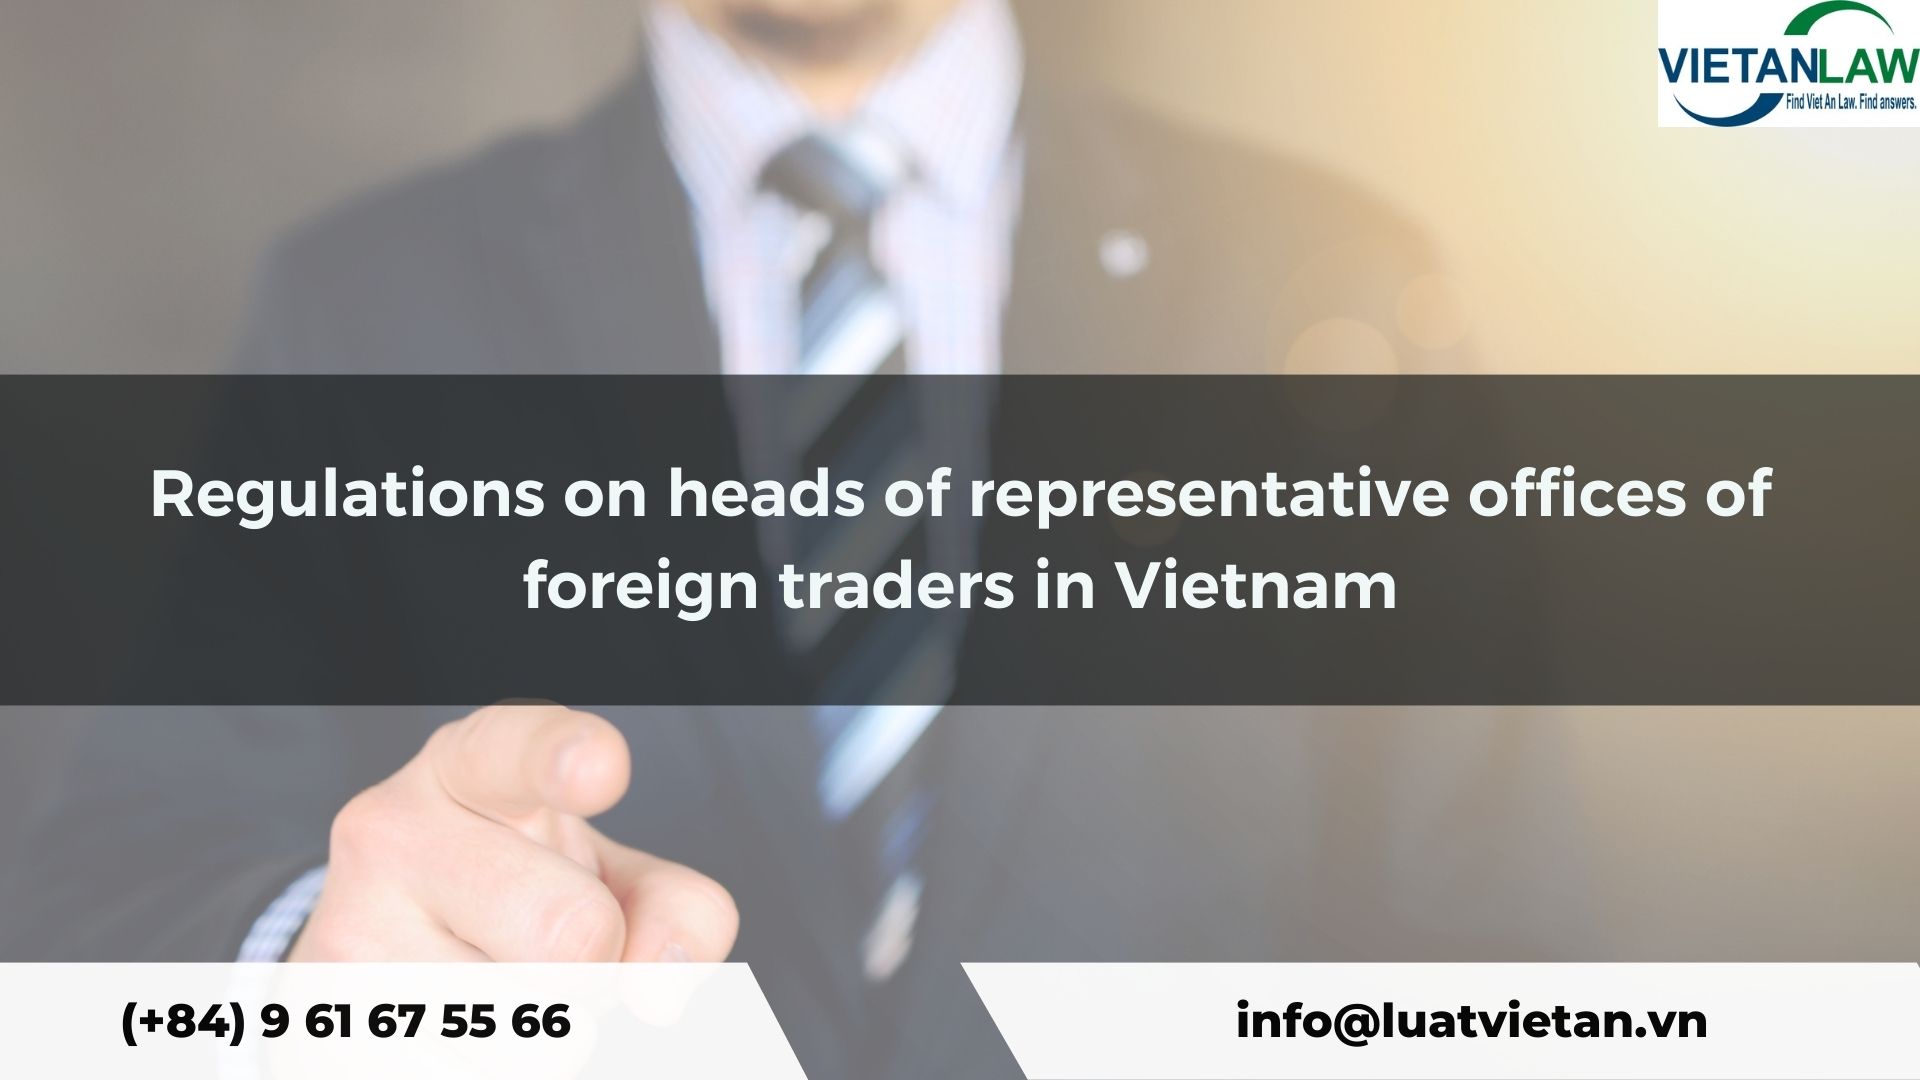 Regulations on heads of representative offices of foreign traders in Vietnam